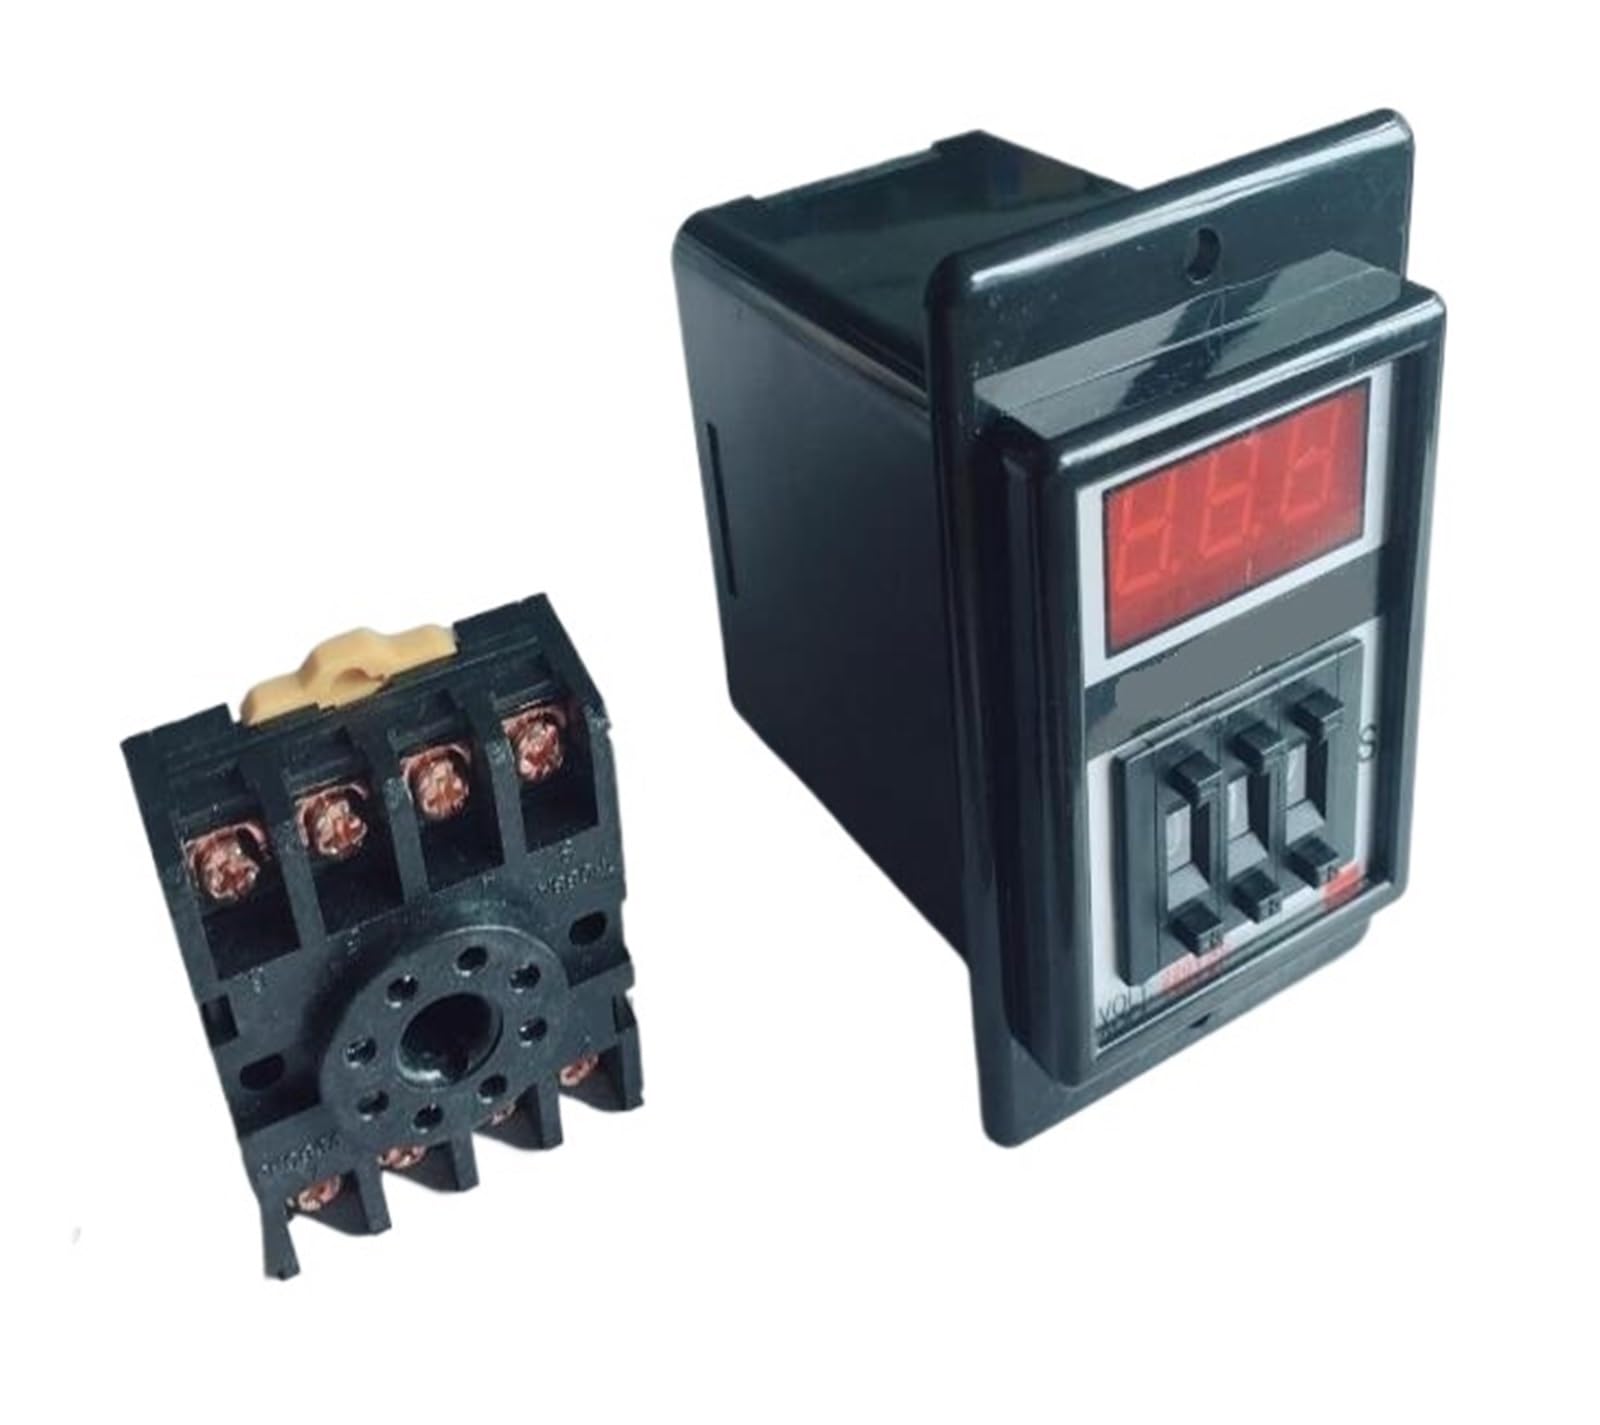 1-999S 1-99.9S 1-999M digits programmable timer delay relay ASY-3D Delay Timer Time Relay 8PIN with base ZDVHOMCB(ASY-3D 999M,AC220V) von ZDVHOMCB